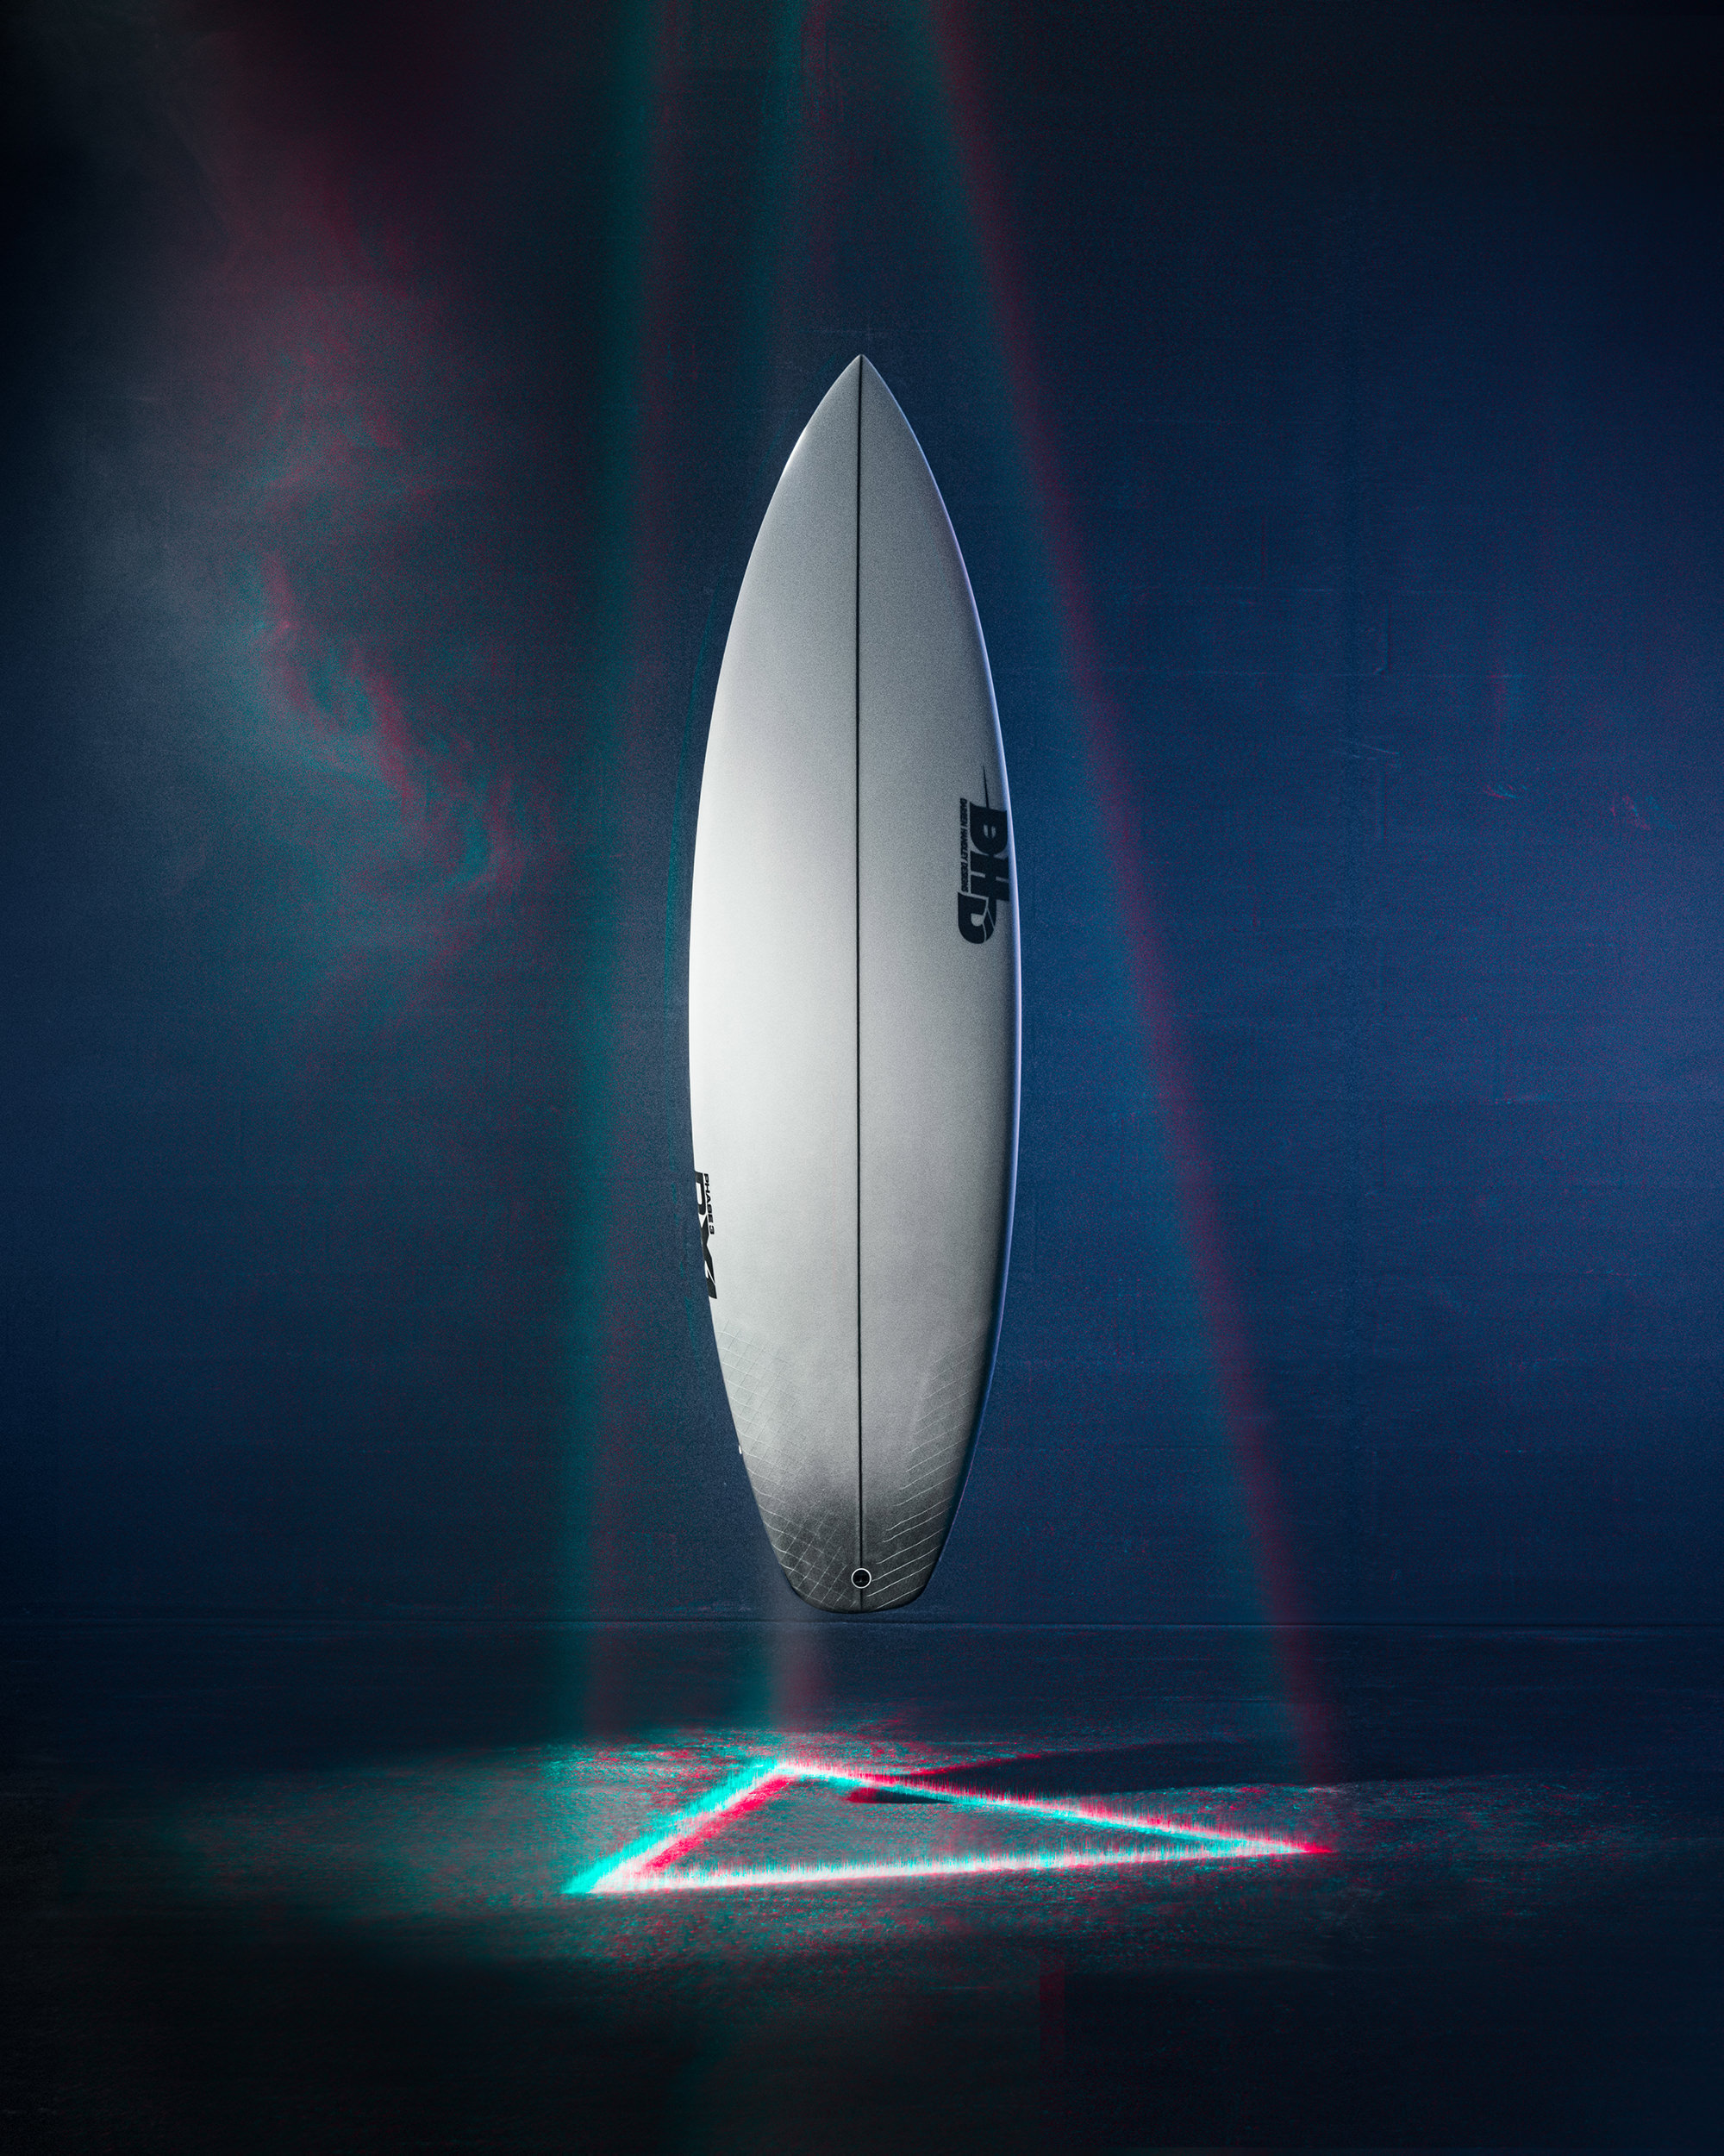 DHD SURF BOARDS NEW MODEL PHASE 3 オーダー受付中です！